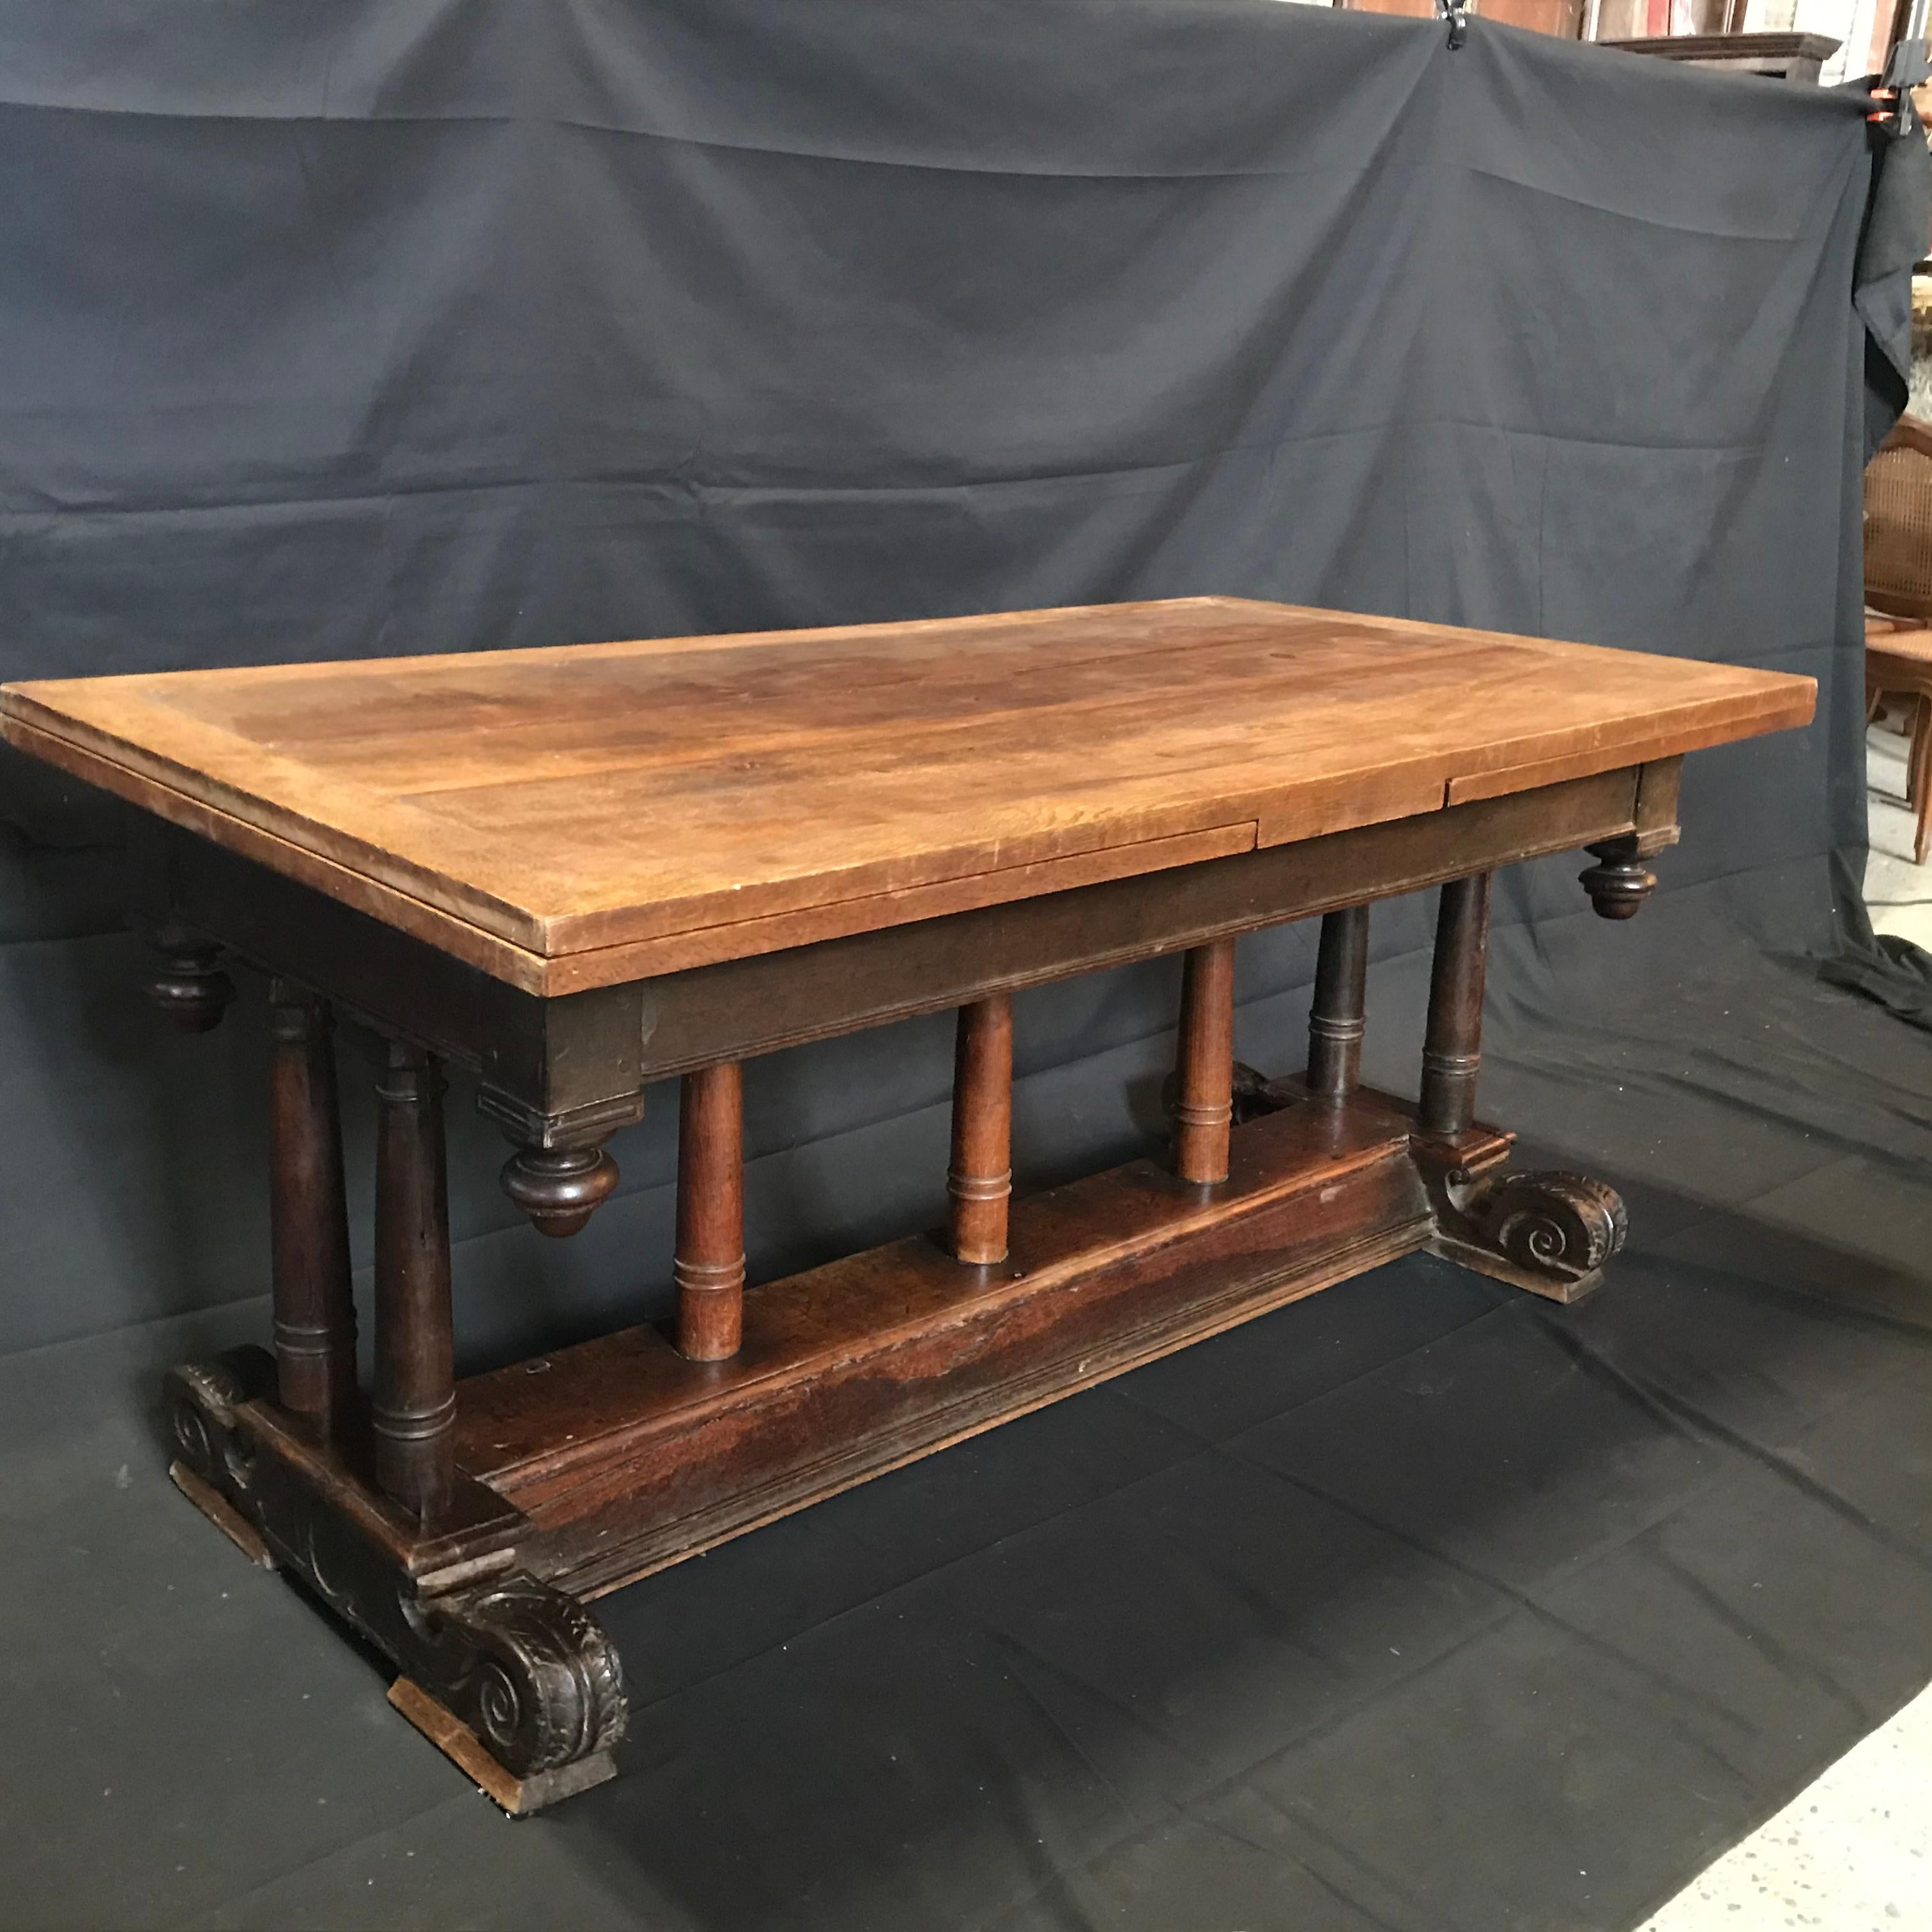 Oak Early French Refectory Table with Leaves from Avignon